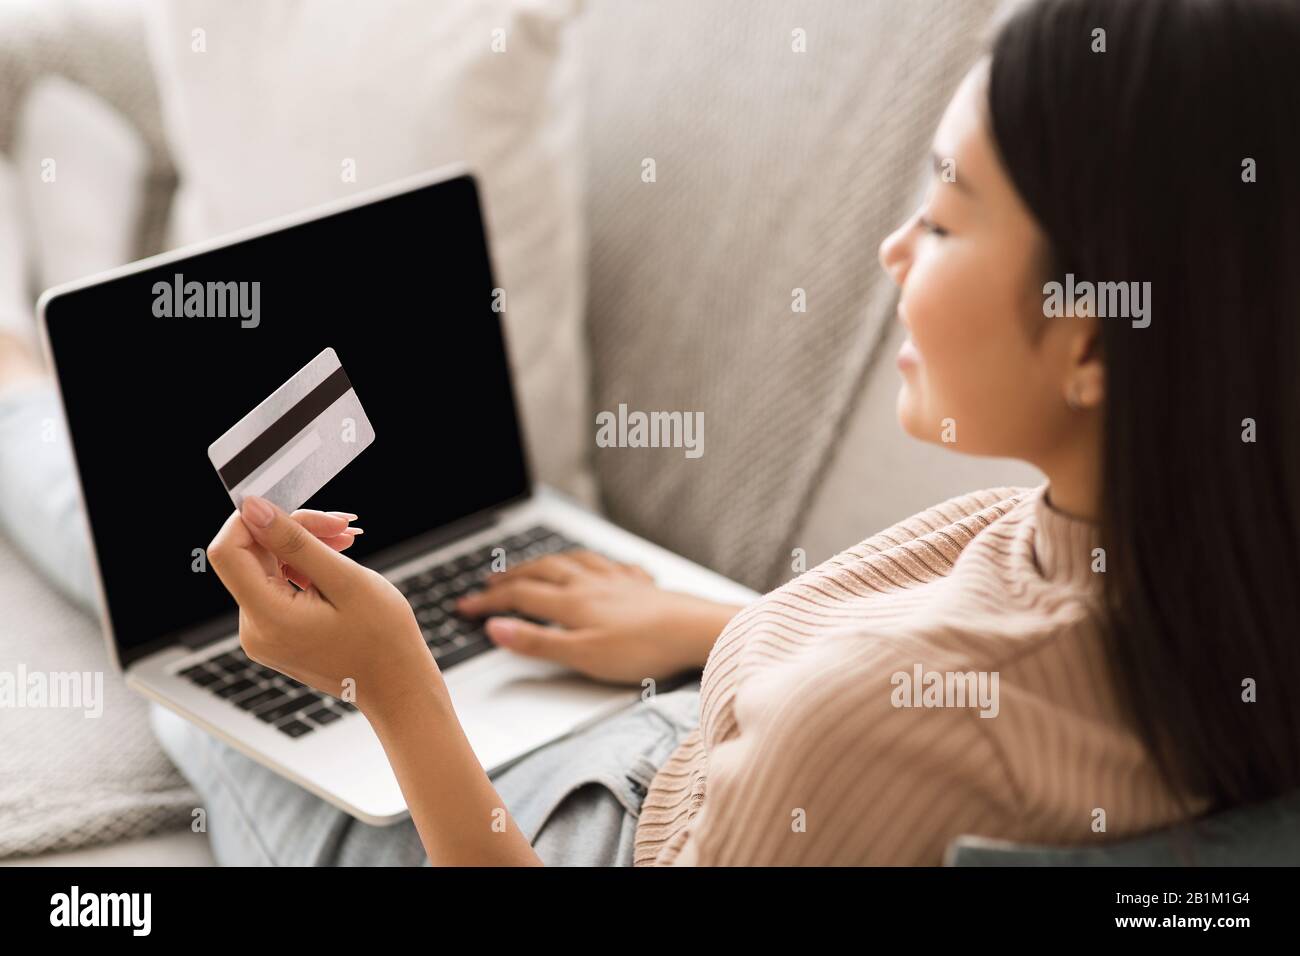 Order online. Girl making purchases on laptop computer Stock Photo